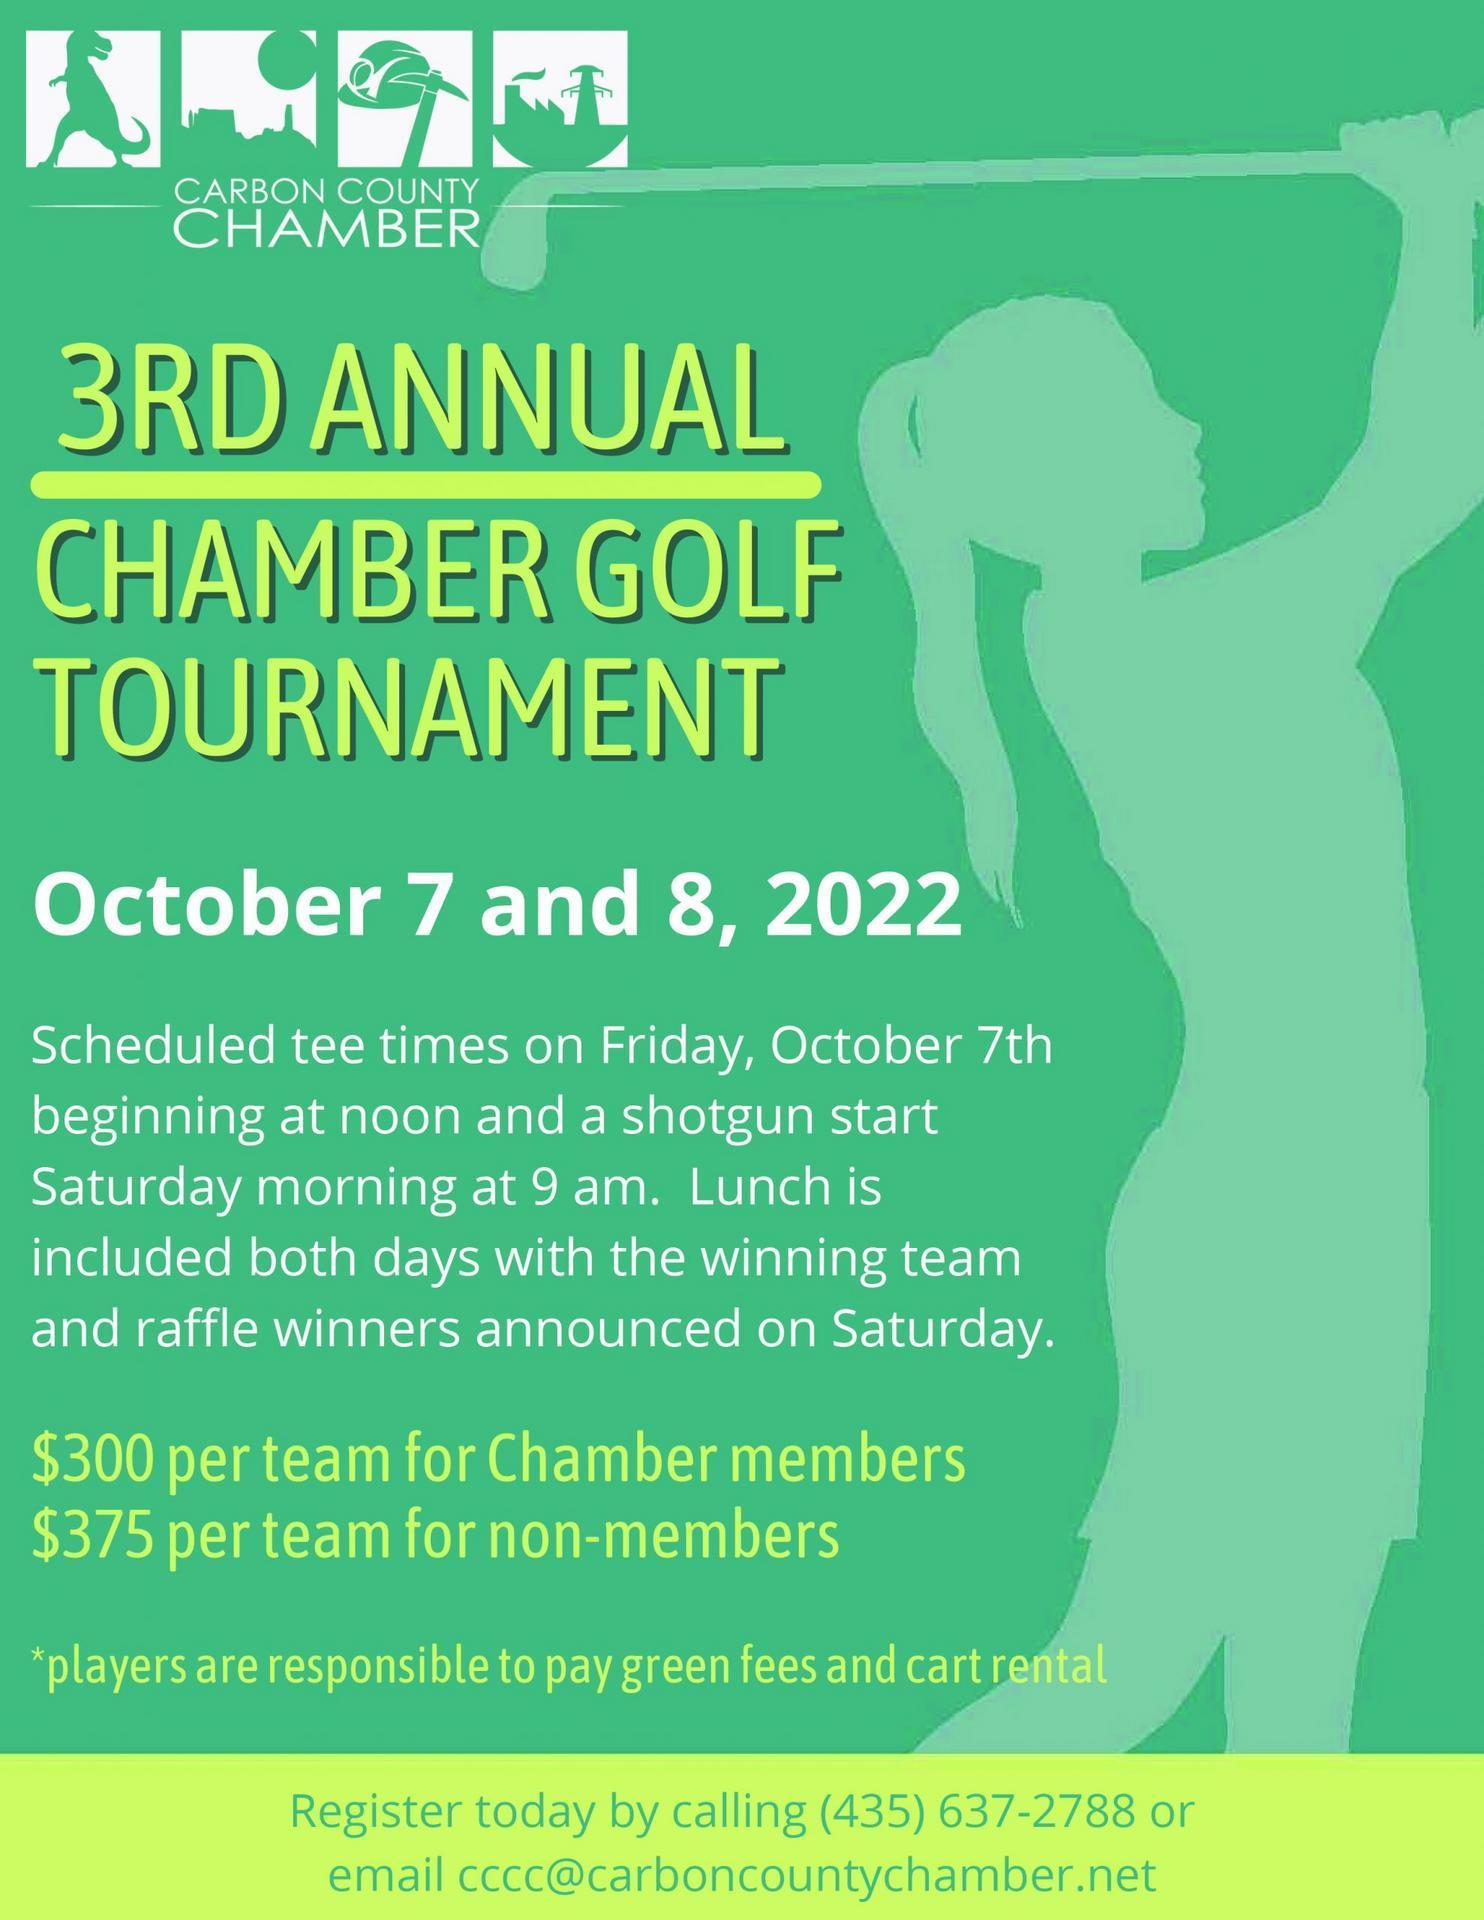 3rd-Annual-Chamber-Golf-Tournament-1-scaled.jpg